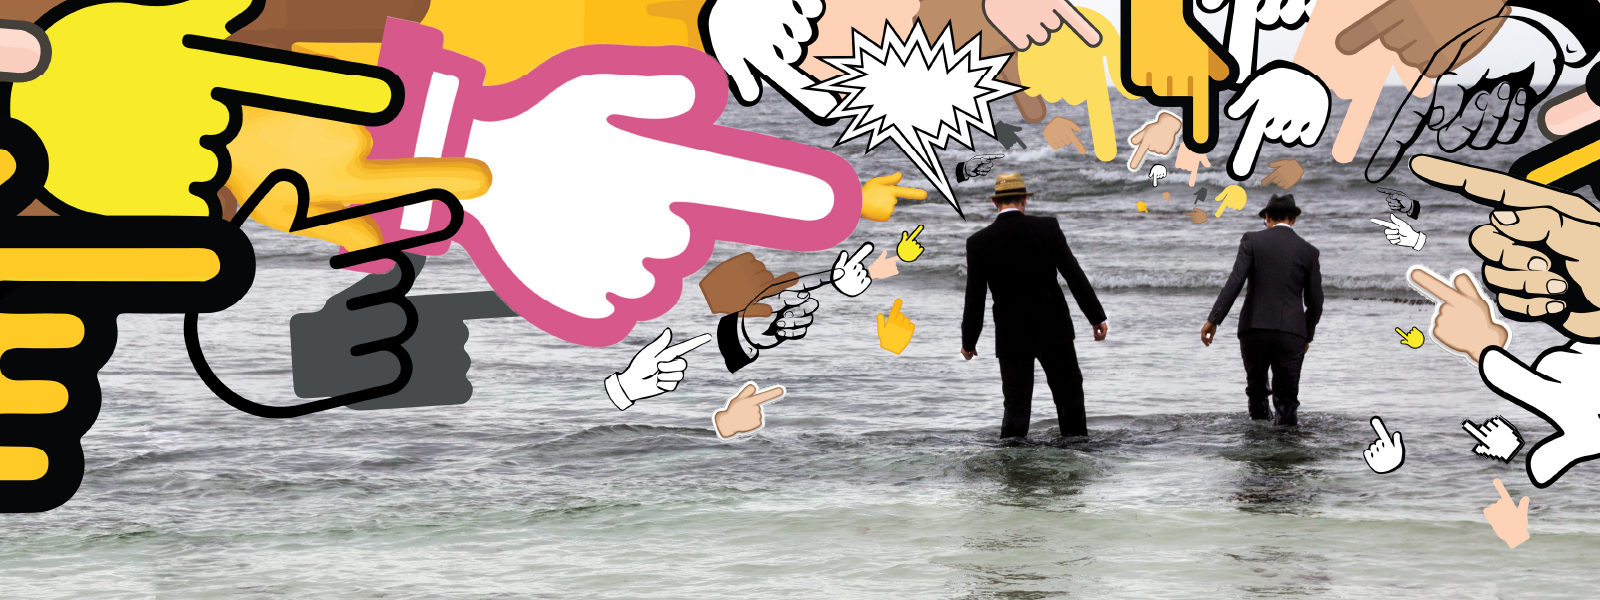 A landscape image with emoji pointing hands layered on top of each other, all pointing towards a central point where two figures wearing suits and fedoras are walking into the ocean. 